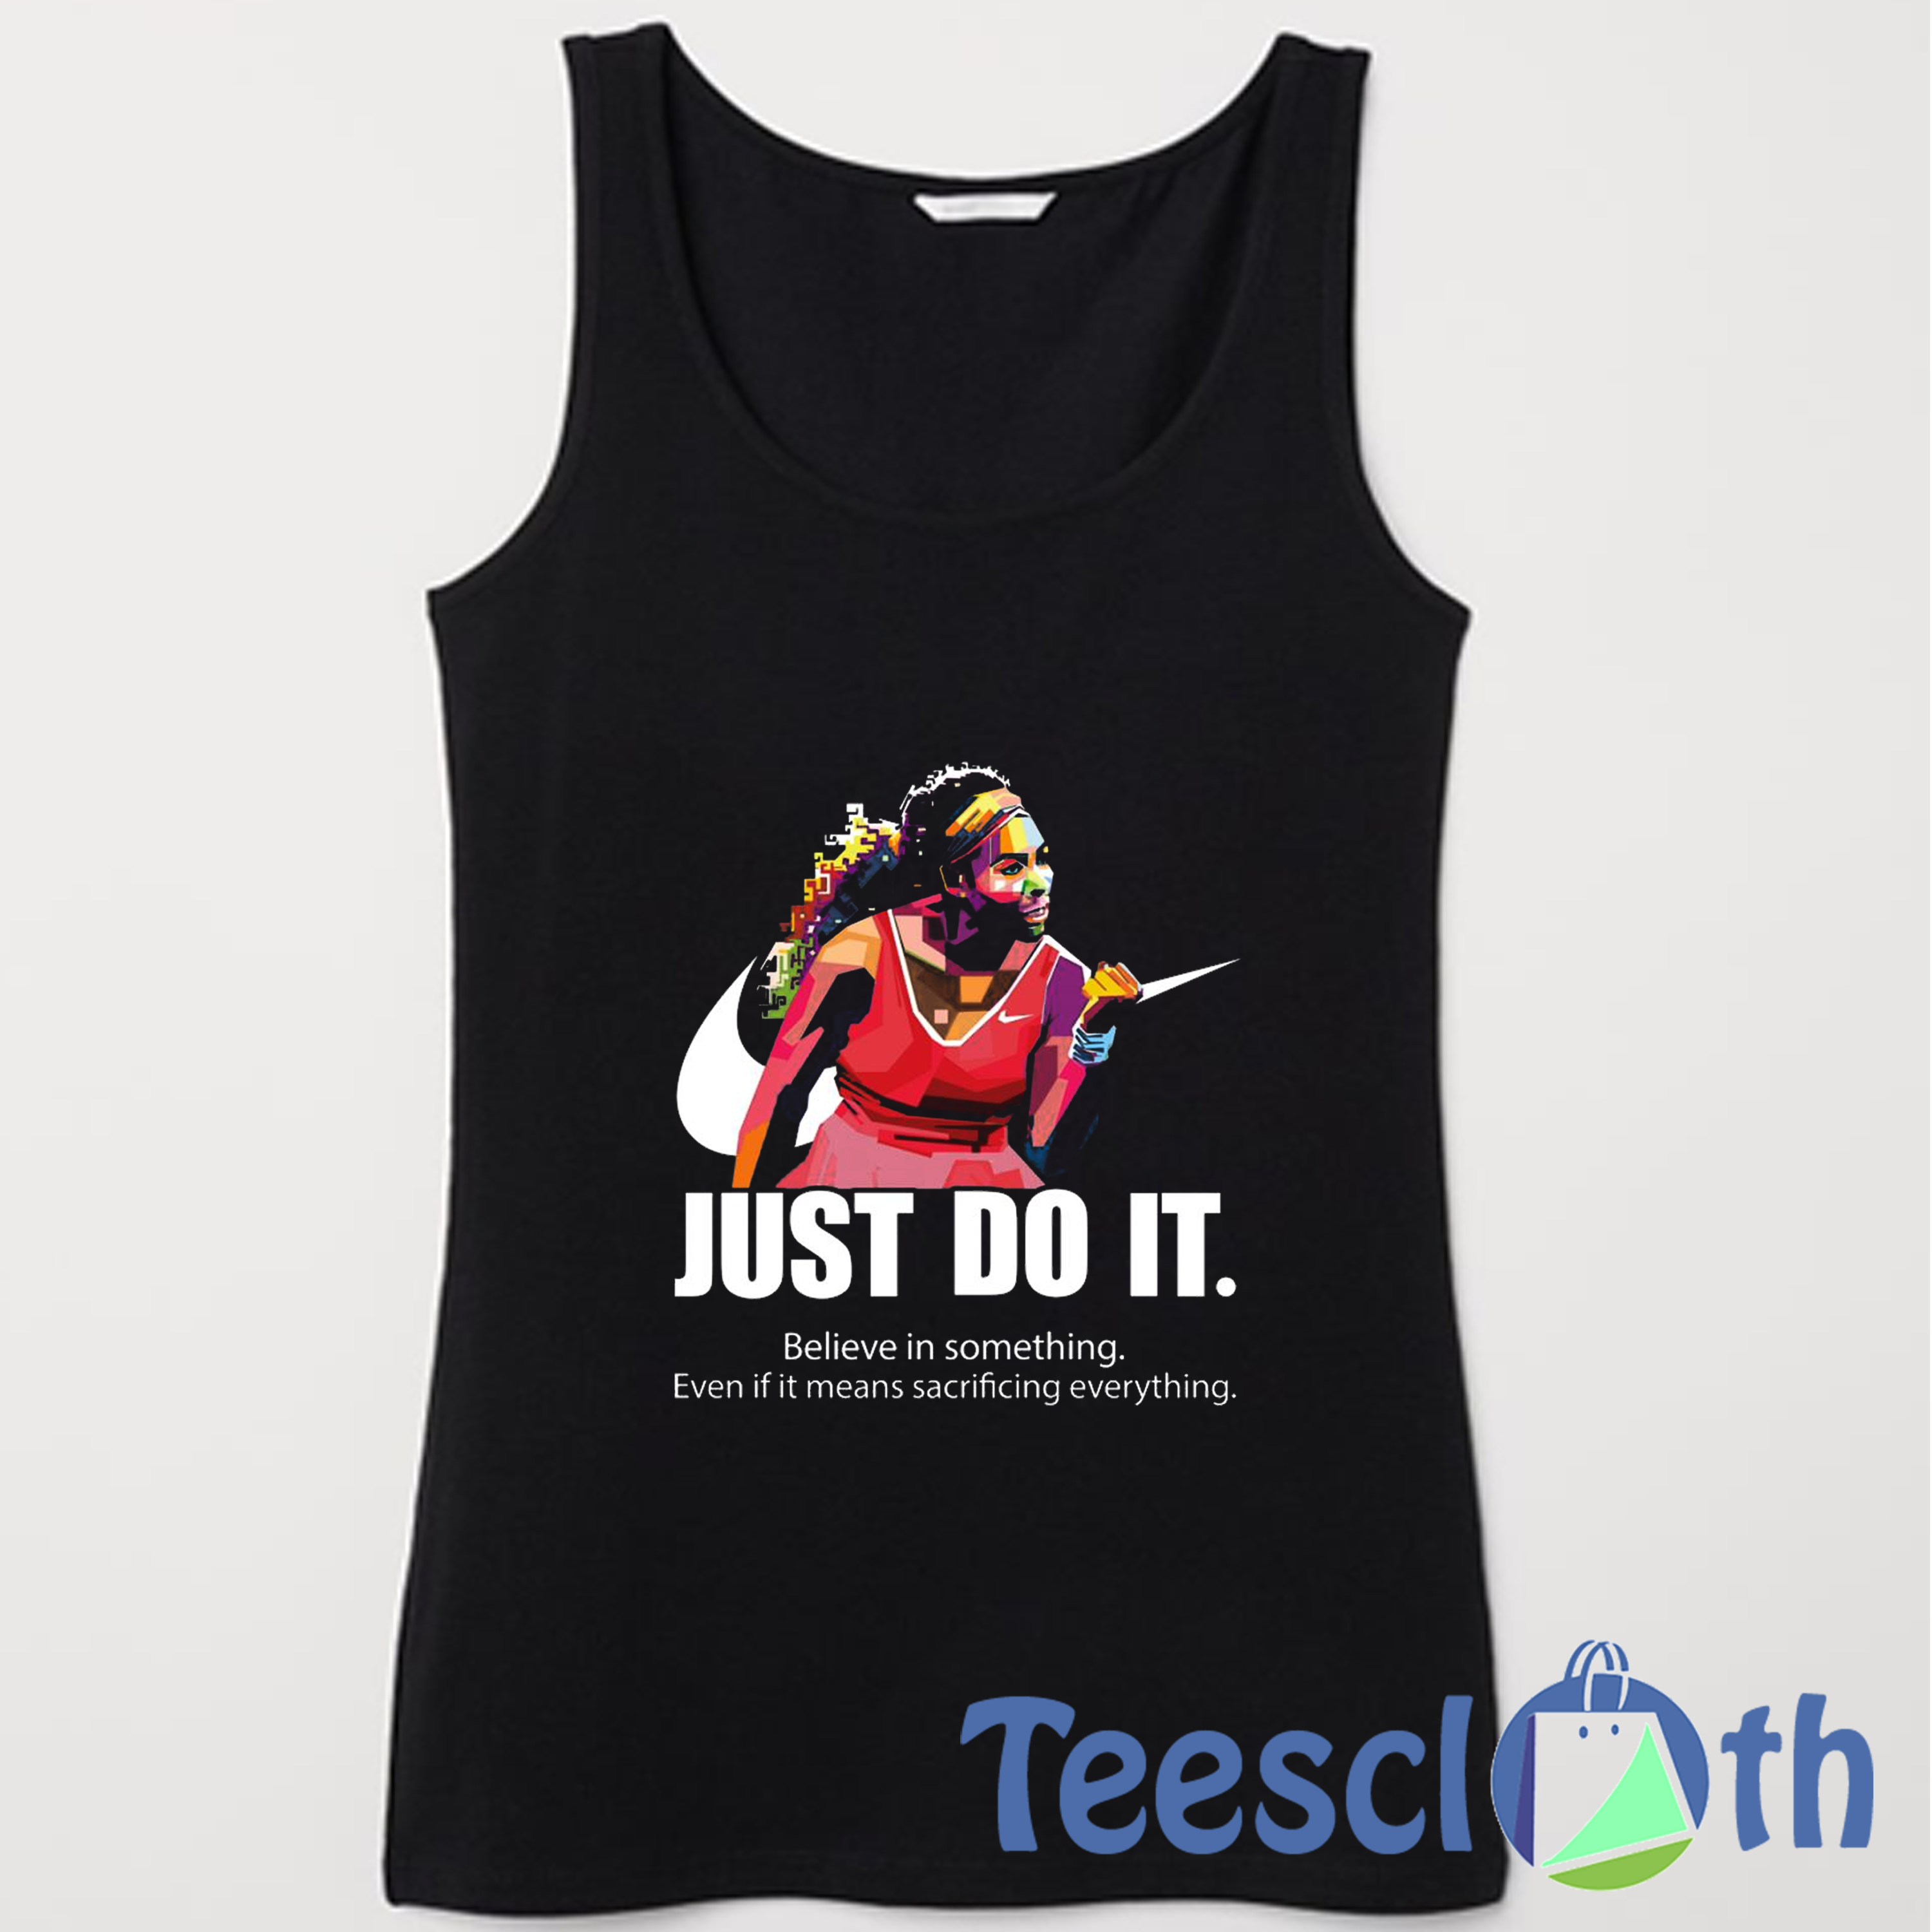 Serena Williams Tank Top Men And Women Size S to 3XL